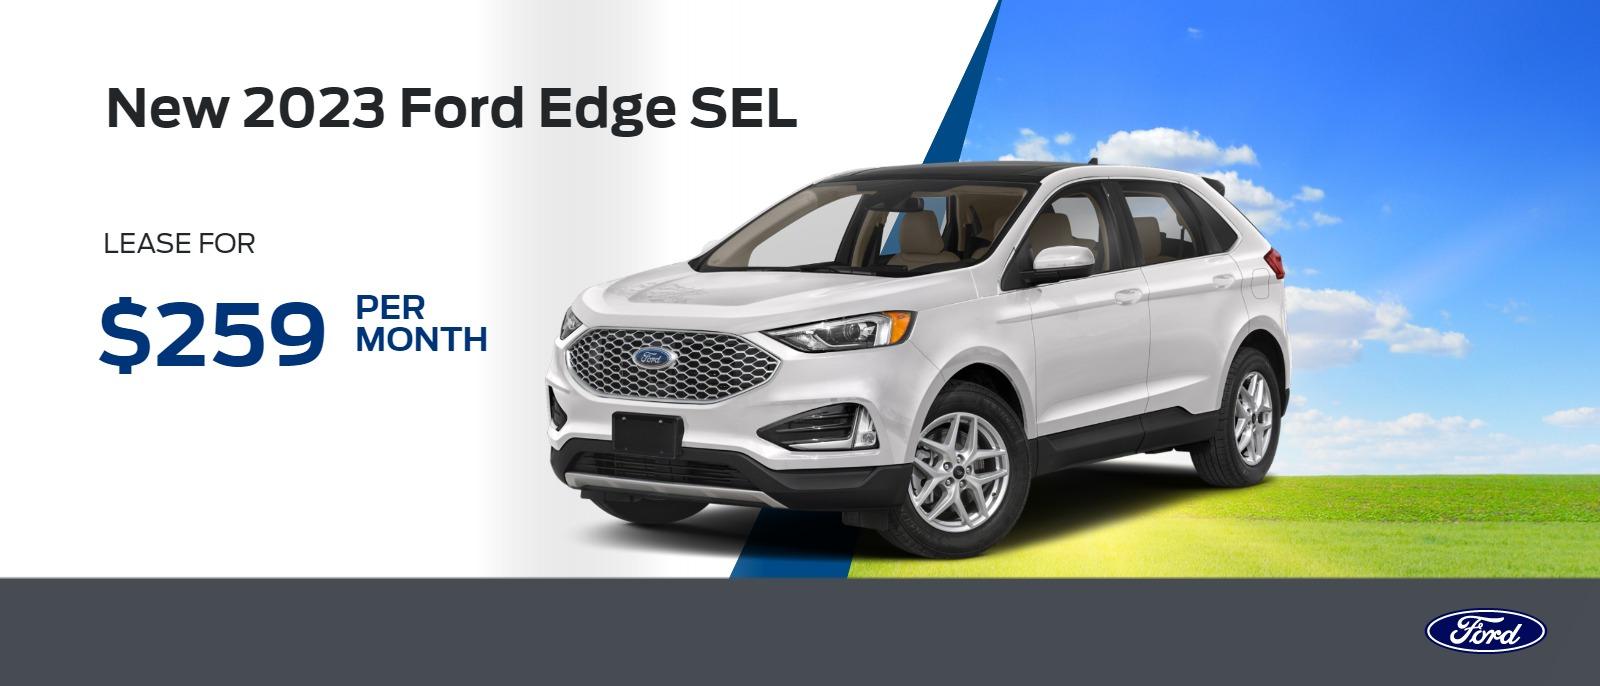 New 2023 Ford Edge SEL $259/month lease